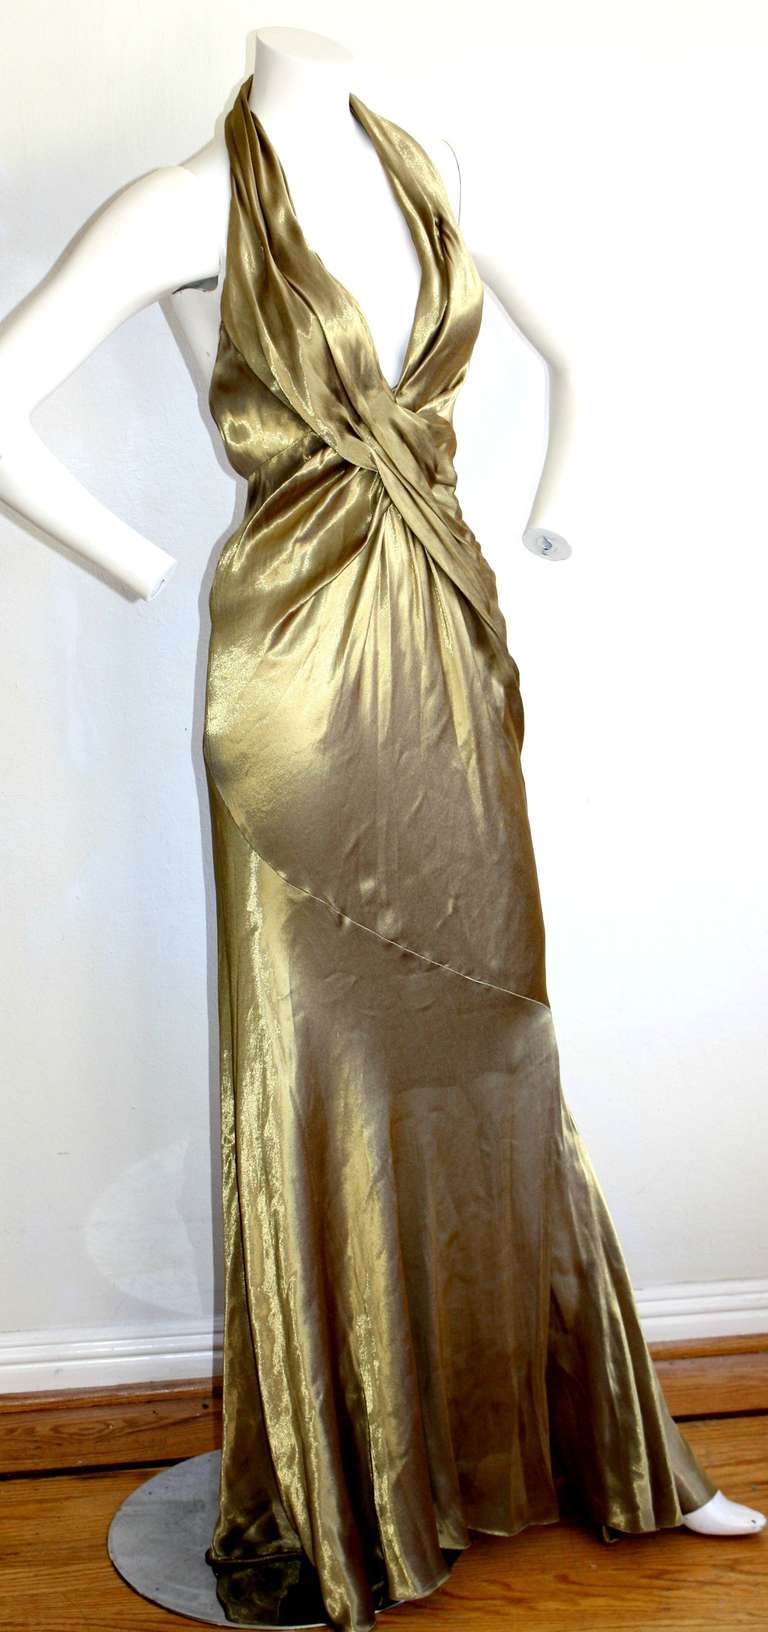 Gorgeous vintage 1990s Donna Karan liquid gold gown. Slinky halter style, with sexy open back. Ruching detail that makes for a flattering bodycon fit. Marked Size Us 2, but will fit 4 as well due to stretch.